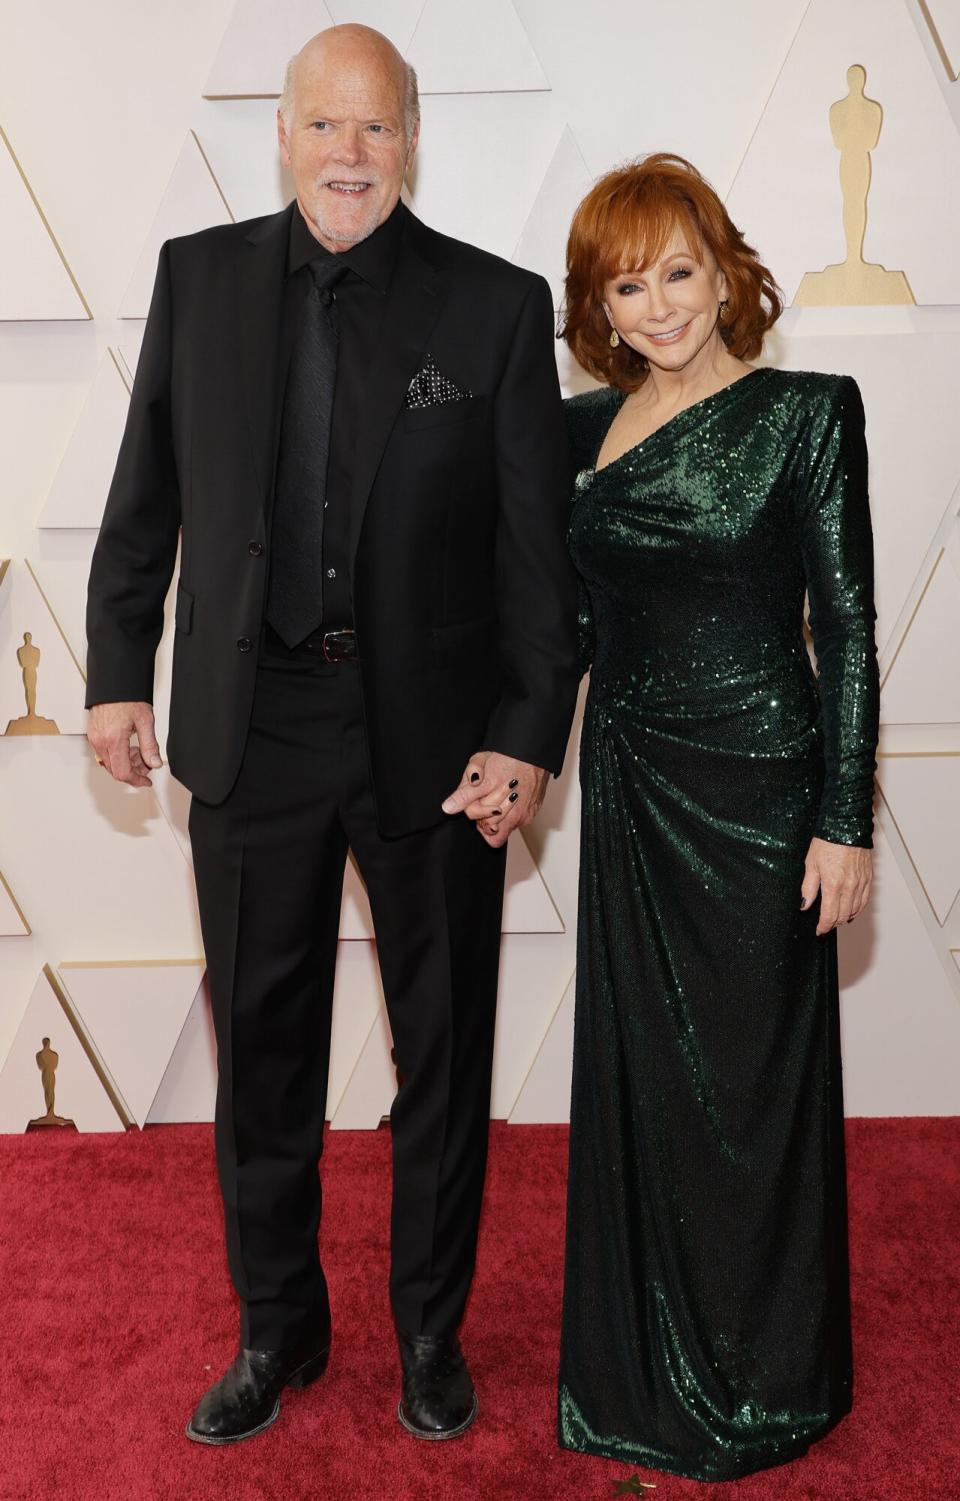 Rex Linn and Reba McEntire attends the 94th Annual Academy Awards at Hollywood and Highland on March 27, 2022 in Hollywood, California